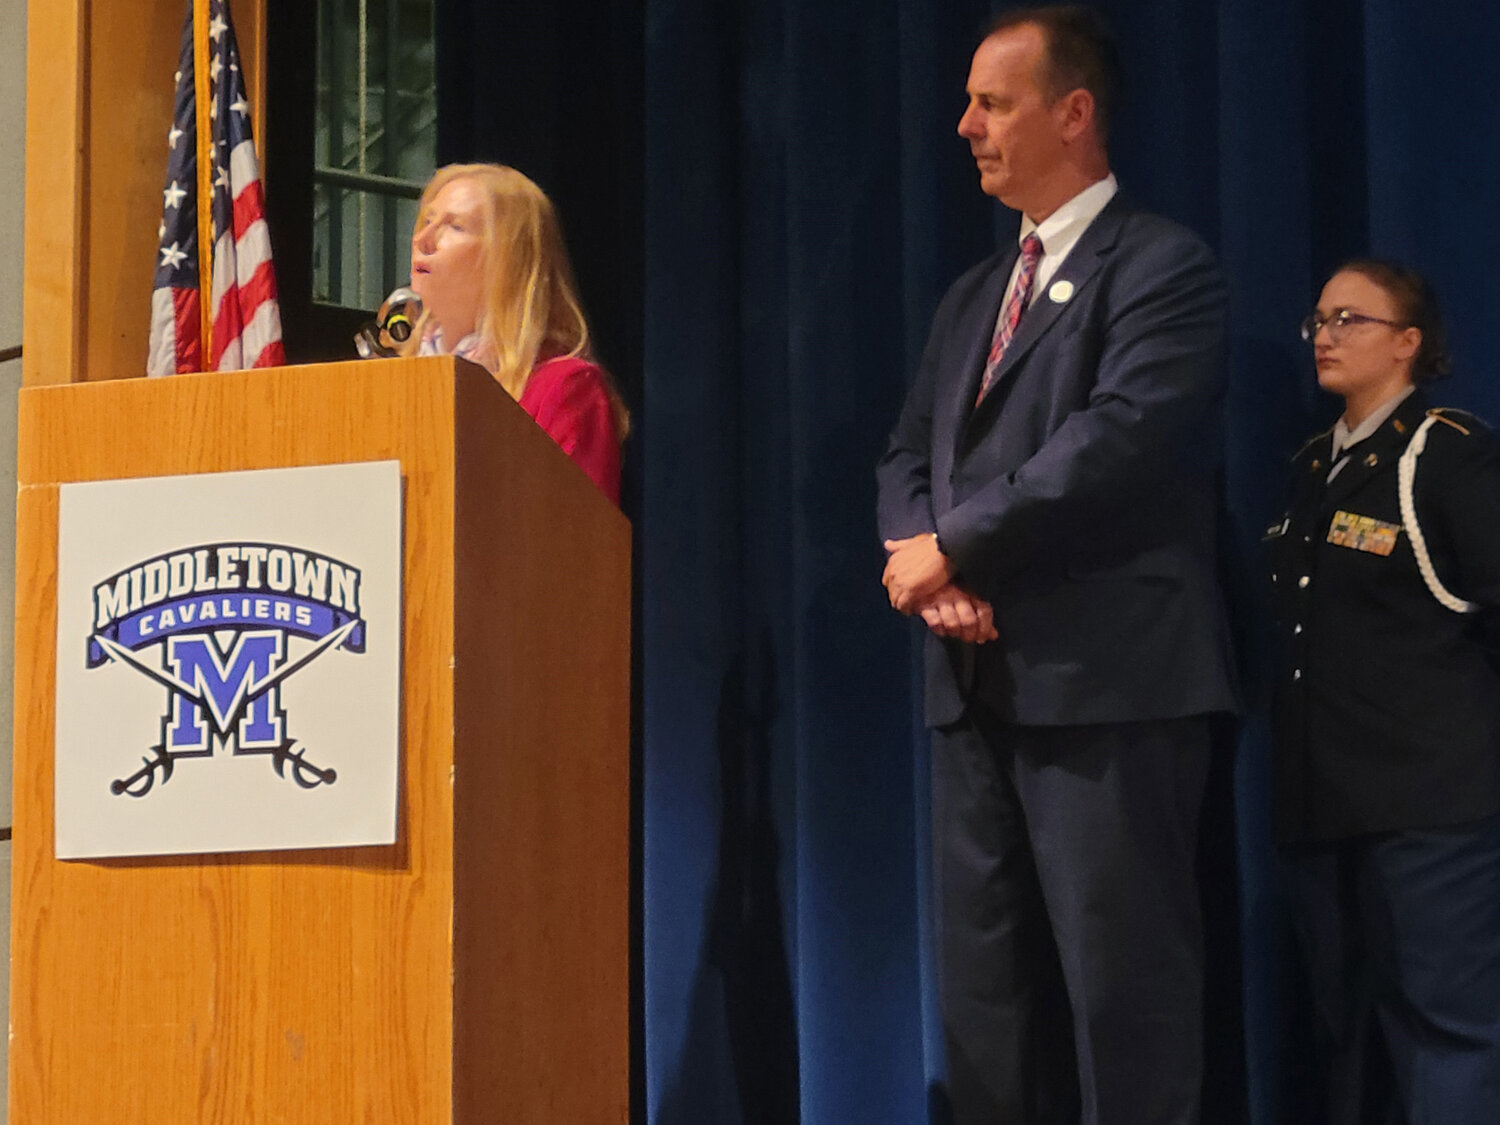 State Sen. Stephanie Hansen, left, speaks at the Patriot Day Ceremony held in remembrance of 9/11 Monday at Middletown High, joined by Rep. Kevin Hensley. The legislators were primary sponsors of the 9/11 Remembrance Flag Act that became law in 2022.